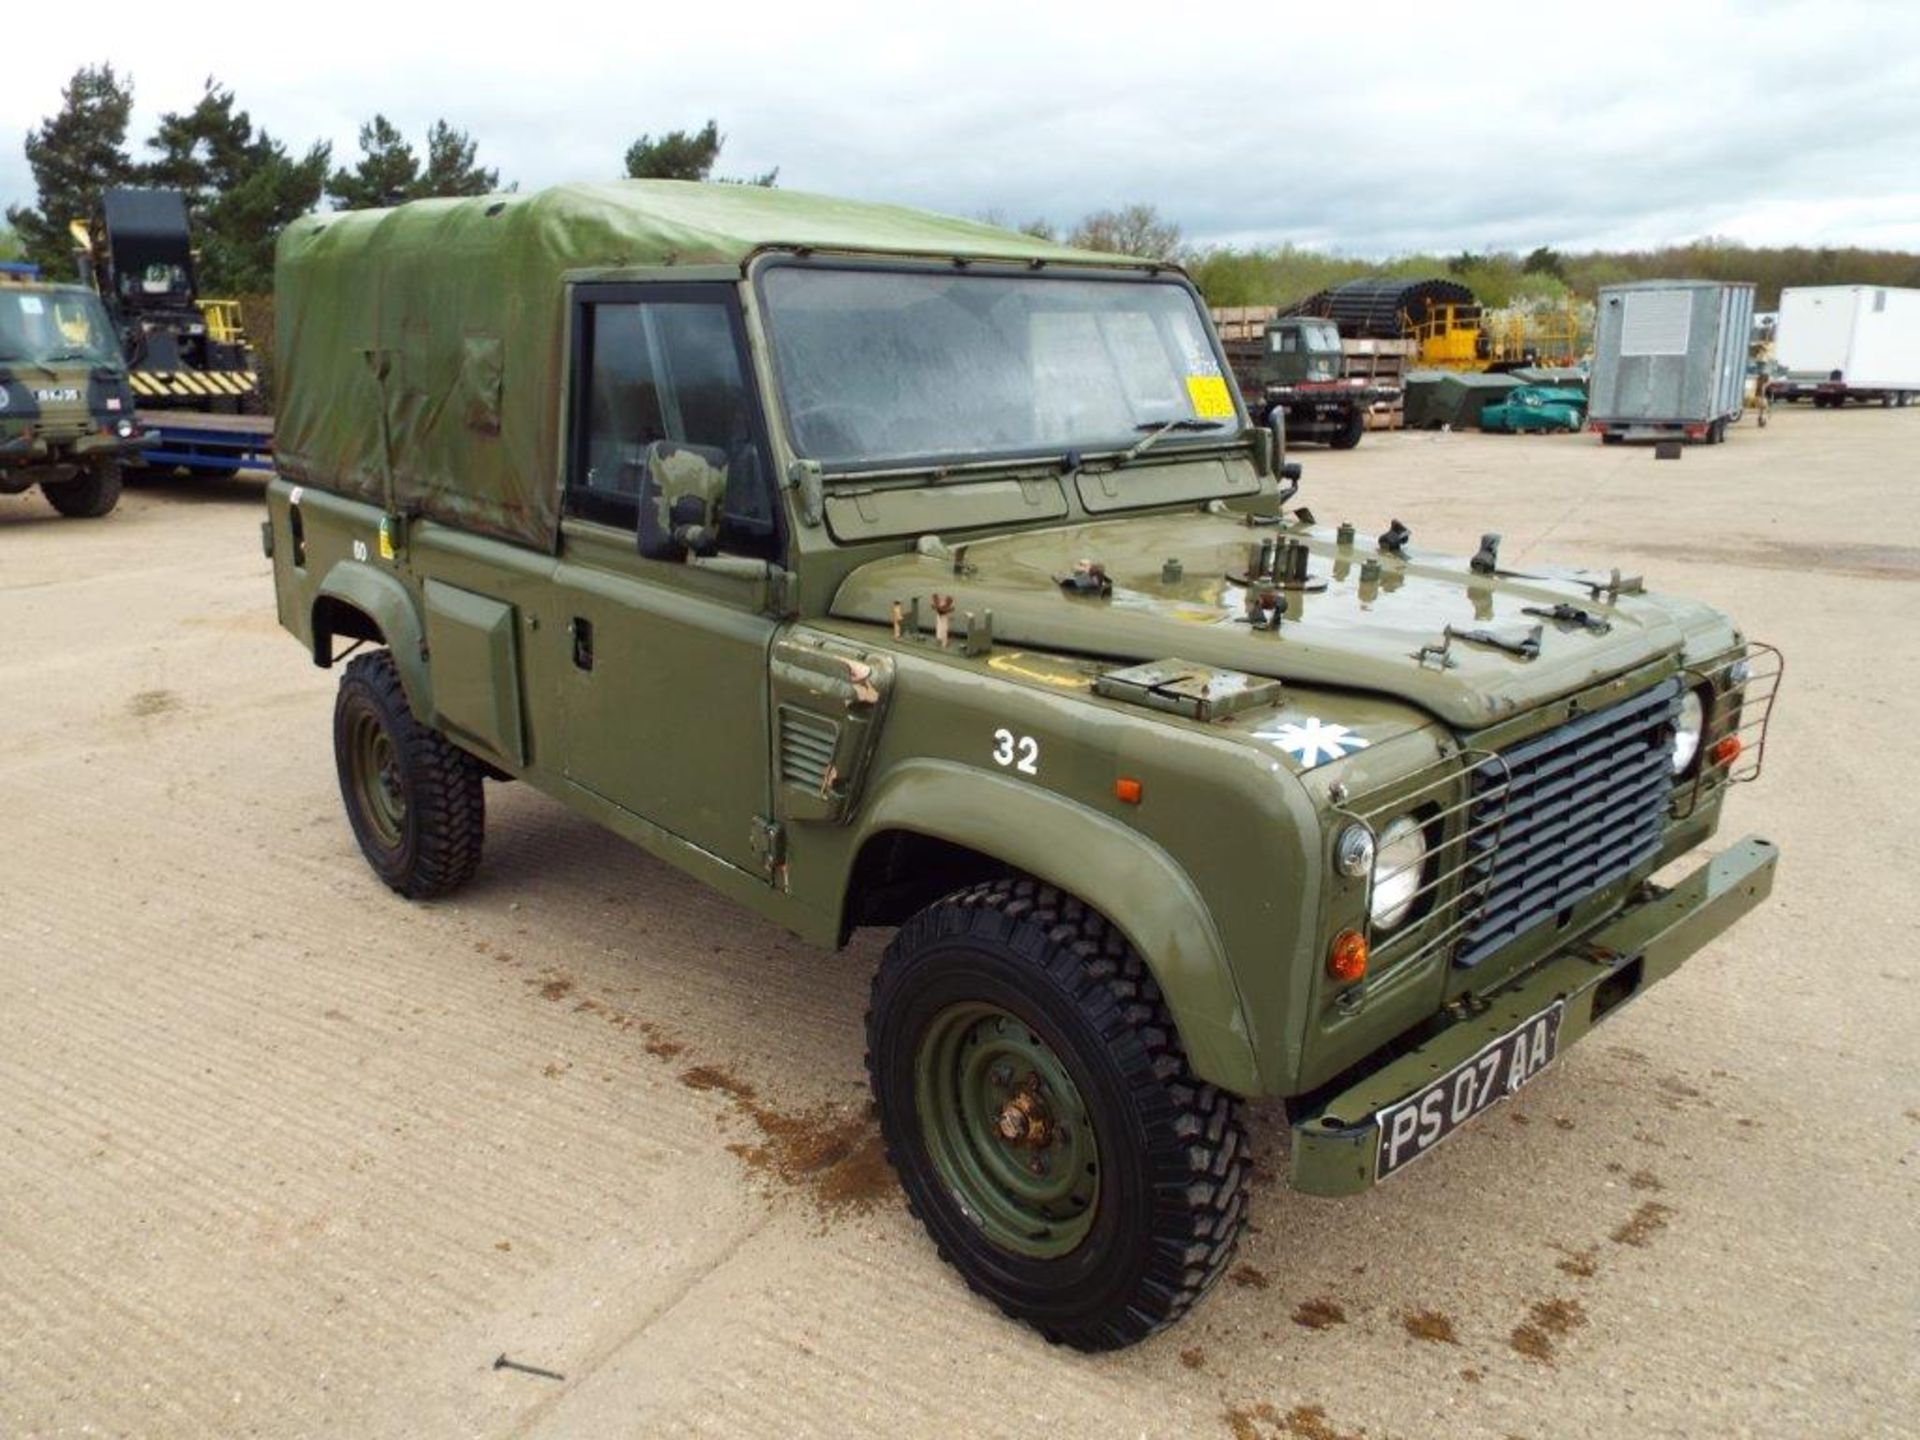 Military Specification Land Rover Wolf 110 Soft Top